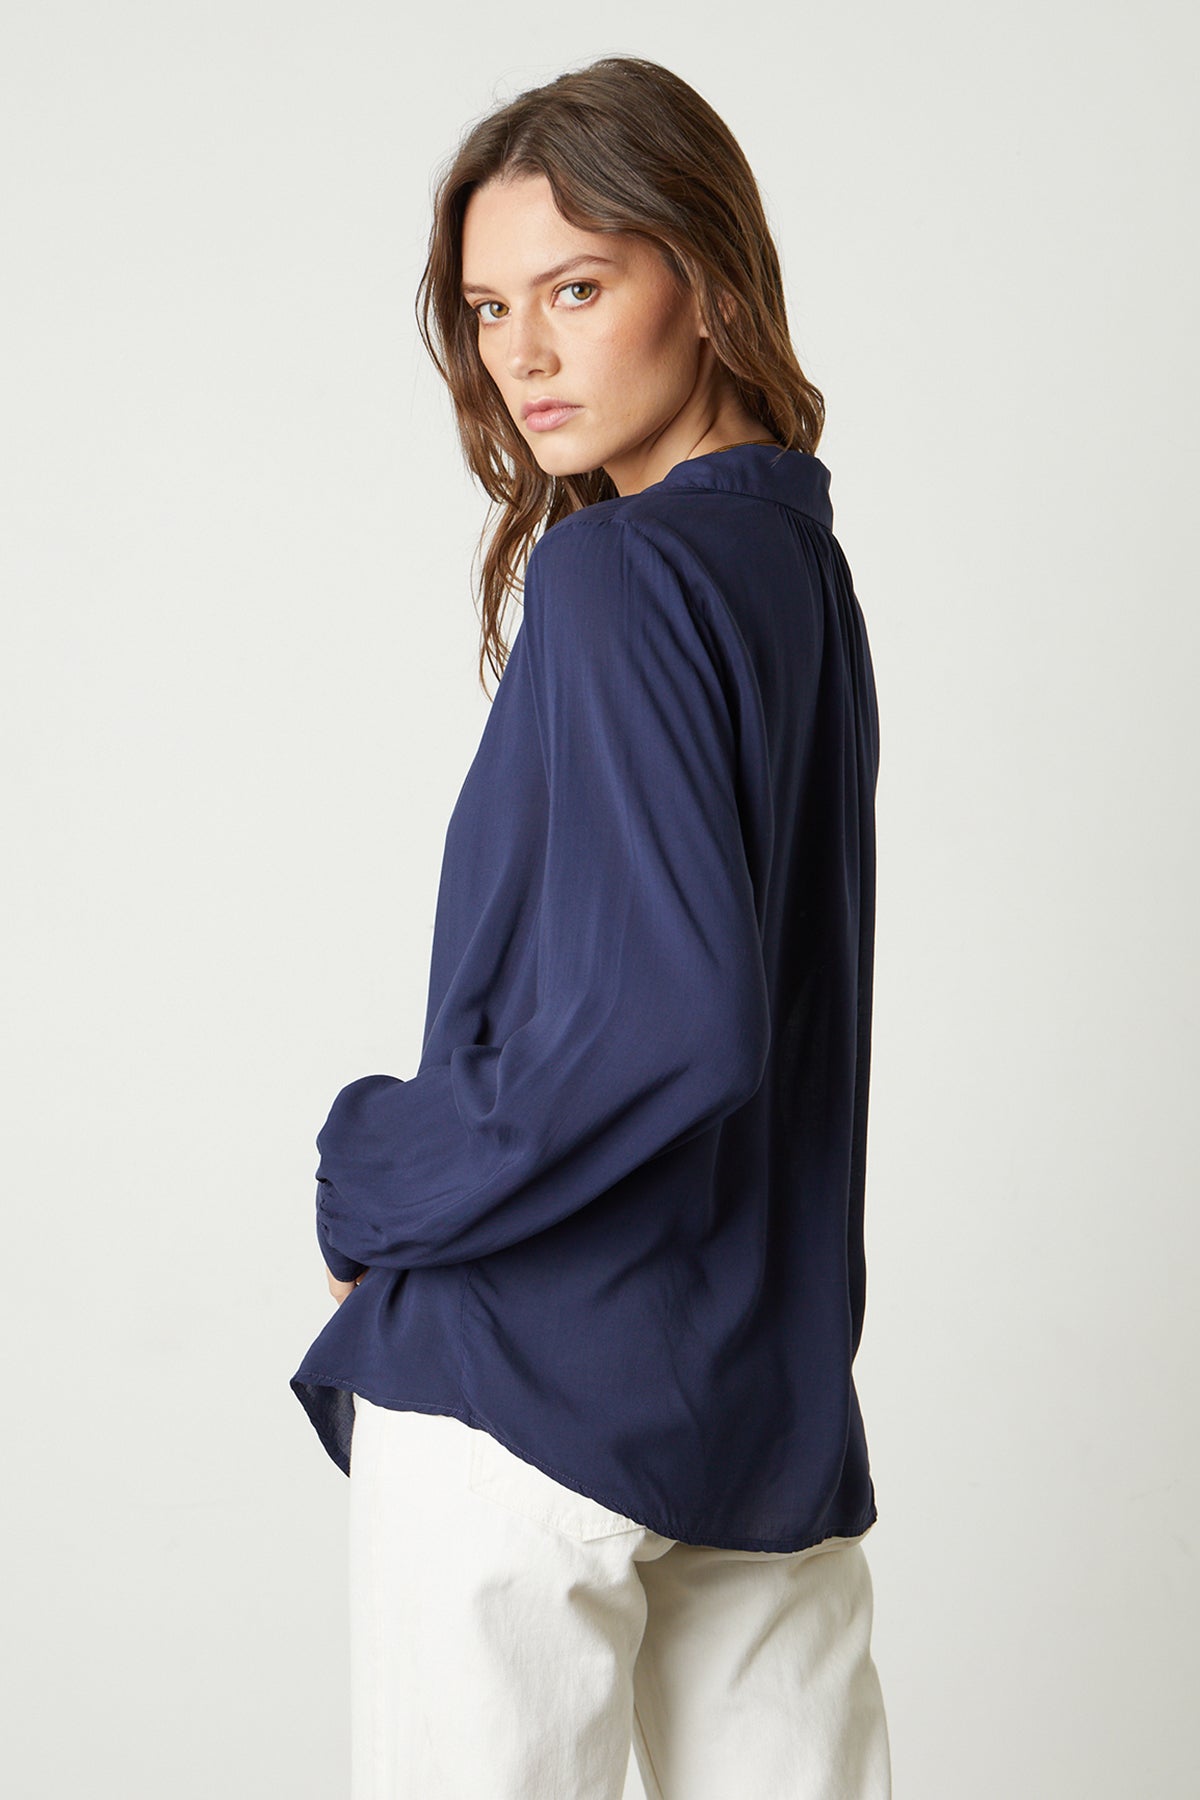   Josey V-Neck Collar Top in postman blue with white denim side and back 